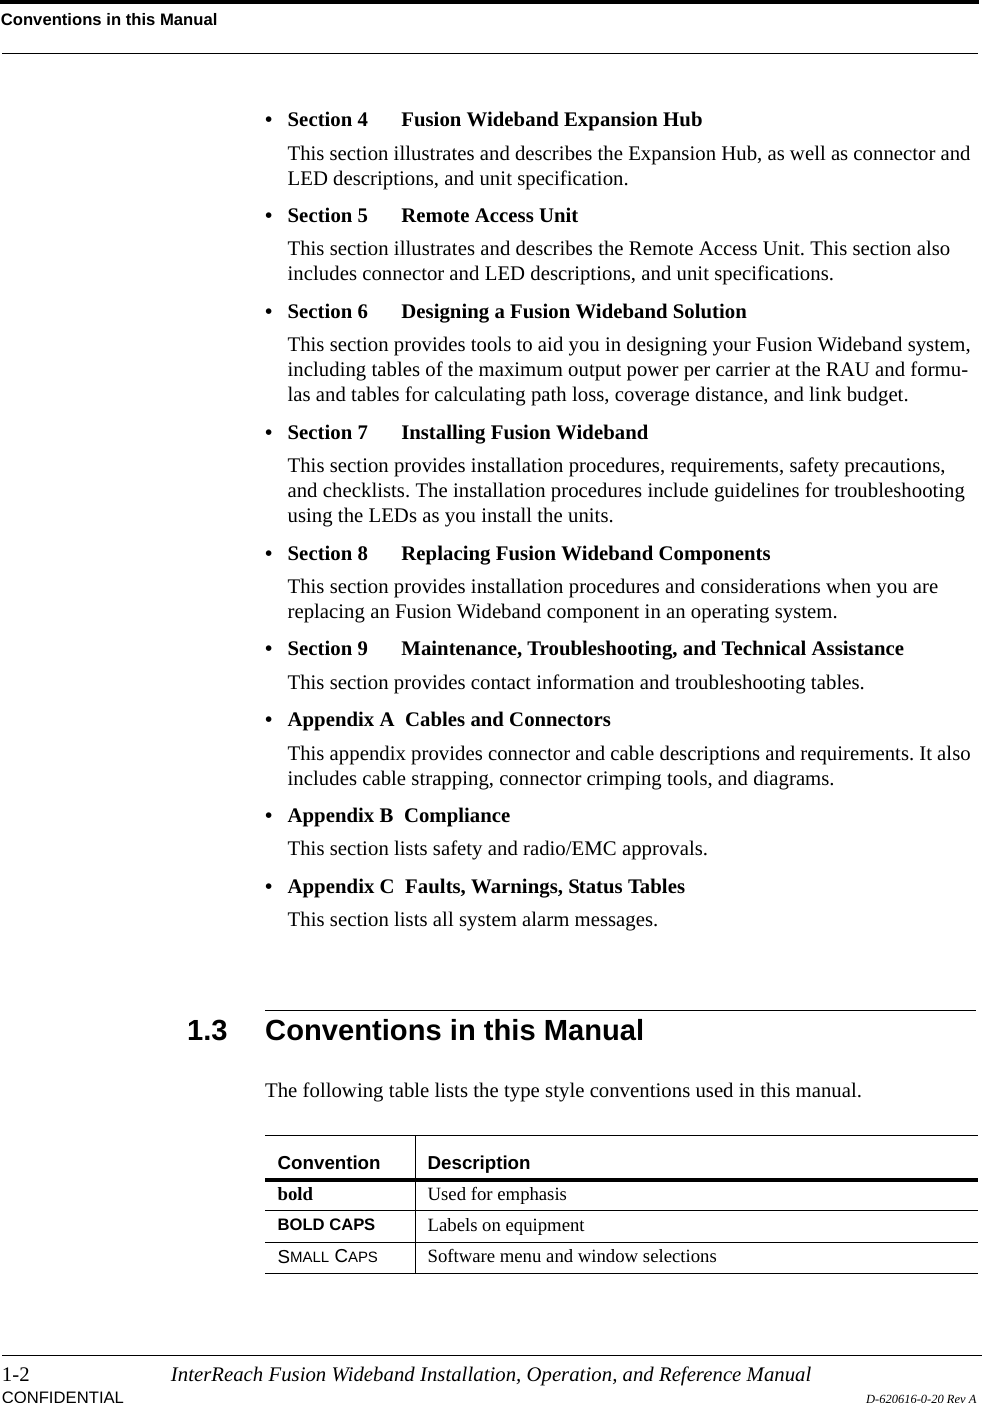 Conventions in this Manual1-2 InterReach Fusion Wideband Installation, Operation, and Reference ManualCONFIDENTIAL D-620616-0-20 Rev A• Section 4   Fusion Wideband Expansion HubThis section illustrates and describes the Expansion Hub, as well as connector and LED descriptions, and unit specification.• Section 5   Remote Access UnitThis section illustrates and describes the Remote Access Unit. This section also includes connector and LED descriptions, and unit specifications.• Section 6   Designing a Fusion Wideband SolutionThis section provides tools to aid you in designing your Fusion Wideband system, including tables of the maximum output power per carrier at the RAU and formu-las and tables for calculating path loss, coverage distance, and link budget.• Section 7   Installing Fusion WidebandThis section provides installation procedures, requirements, safety precautions, and checklists. The installation procedures include guidelines for troubleshooting using the LEDs as you install the units.• Section 8   Replacing Fusion Wideband ComponentsThis section provides installation procedures and considerations when you are replacing an Fusion Wideband component in an operating system.• Section 9  Maintenance, Troubleshooting, and Technical AssistanceThis section provides contact information and troubleshooting tables.• Appendix A  Cables and ConnectorsThis appendix provides connector and cable descriptions and requirements. It also includes cable strapping, connector crimping tools, and diagrams.• Appendix B  ComplianceThis section lists safety and radio/EMC approvals.• Appendix C  Faults, Warnings, Status TablesThis section lists all system alarm messages.1.3 Conventions in this ManualThe following table lists the type style conventions used in this manual.Convention Descriptionbold Used for emphasisBOLD CAPS Labels on equipmentSMALL CAPS Software menu and window selections